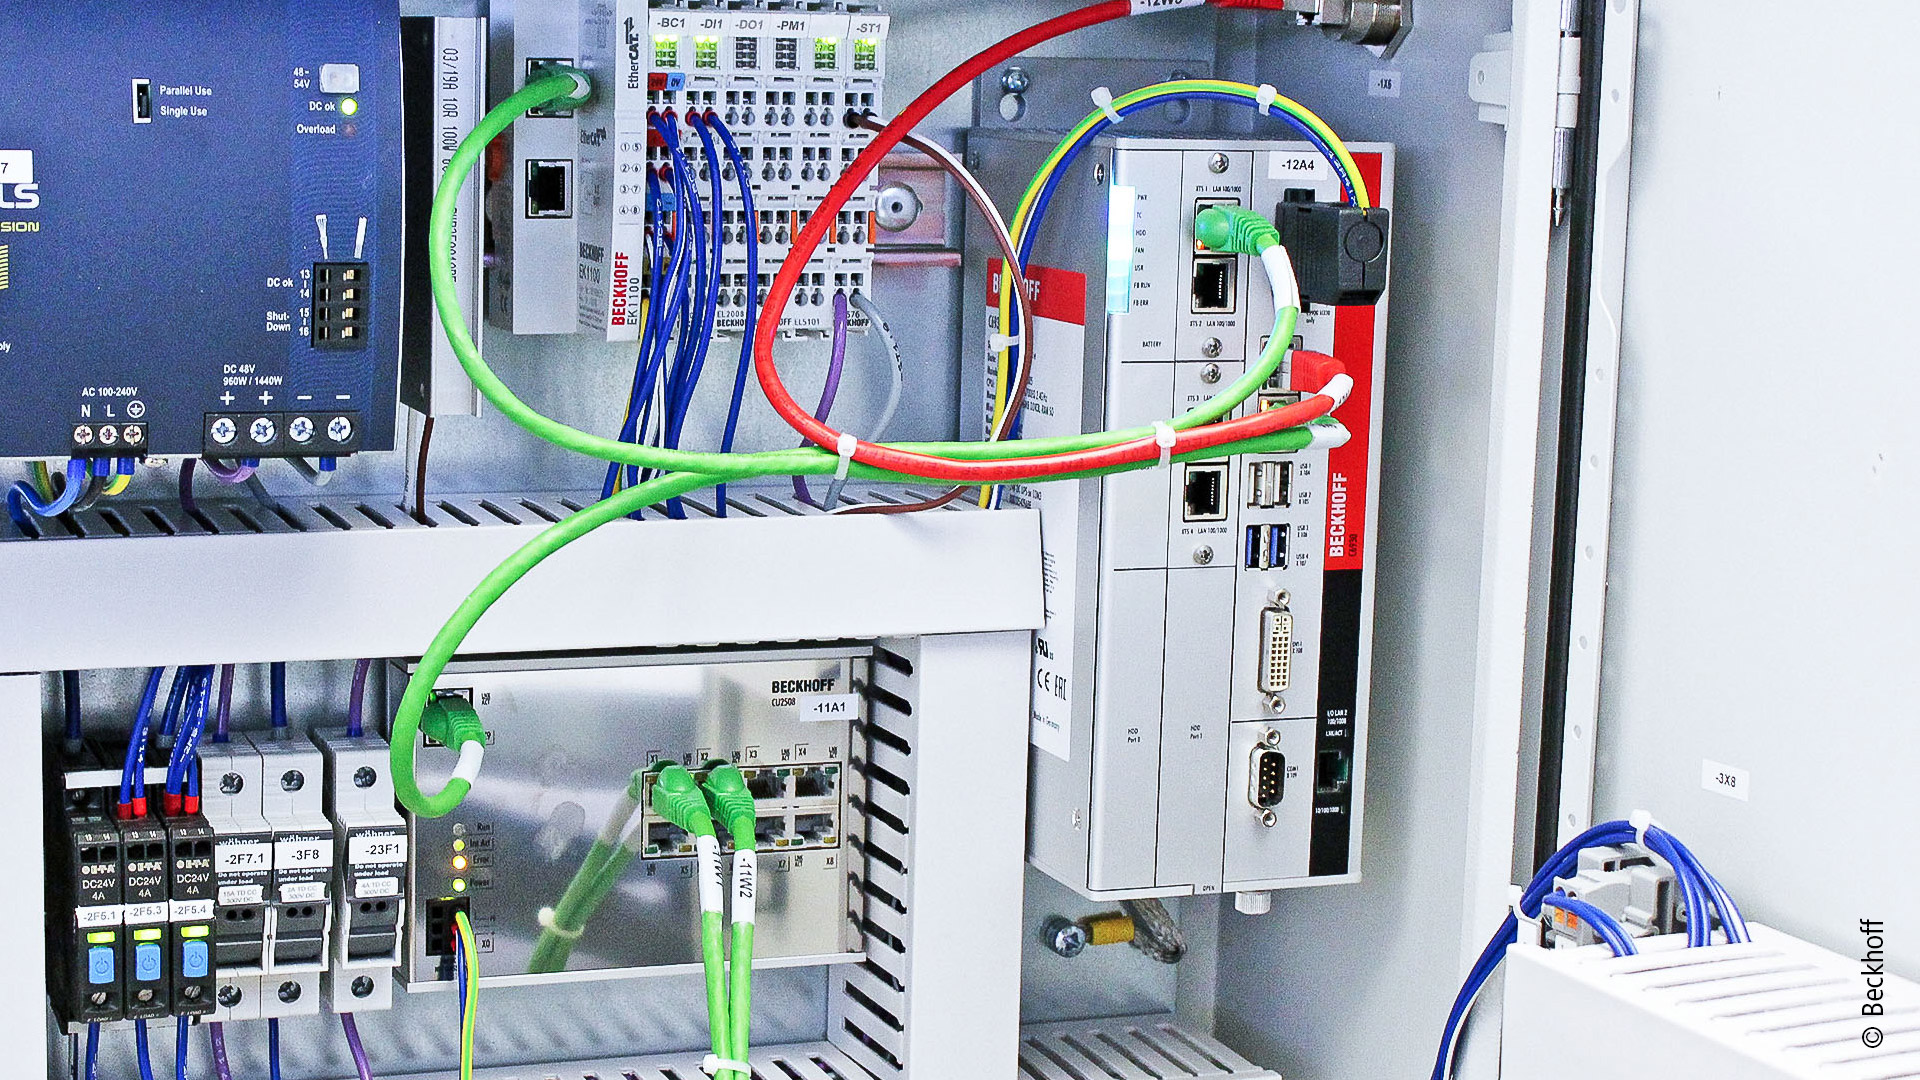 A powerful C6930 control cabinet Industrial PC is used to control the XTS and other machine functions in conjunction with the ultra-fast EtherCAT communication system and the corresponding EtherCAT I/O Terminals. 